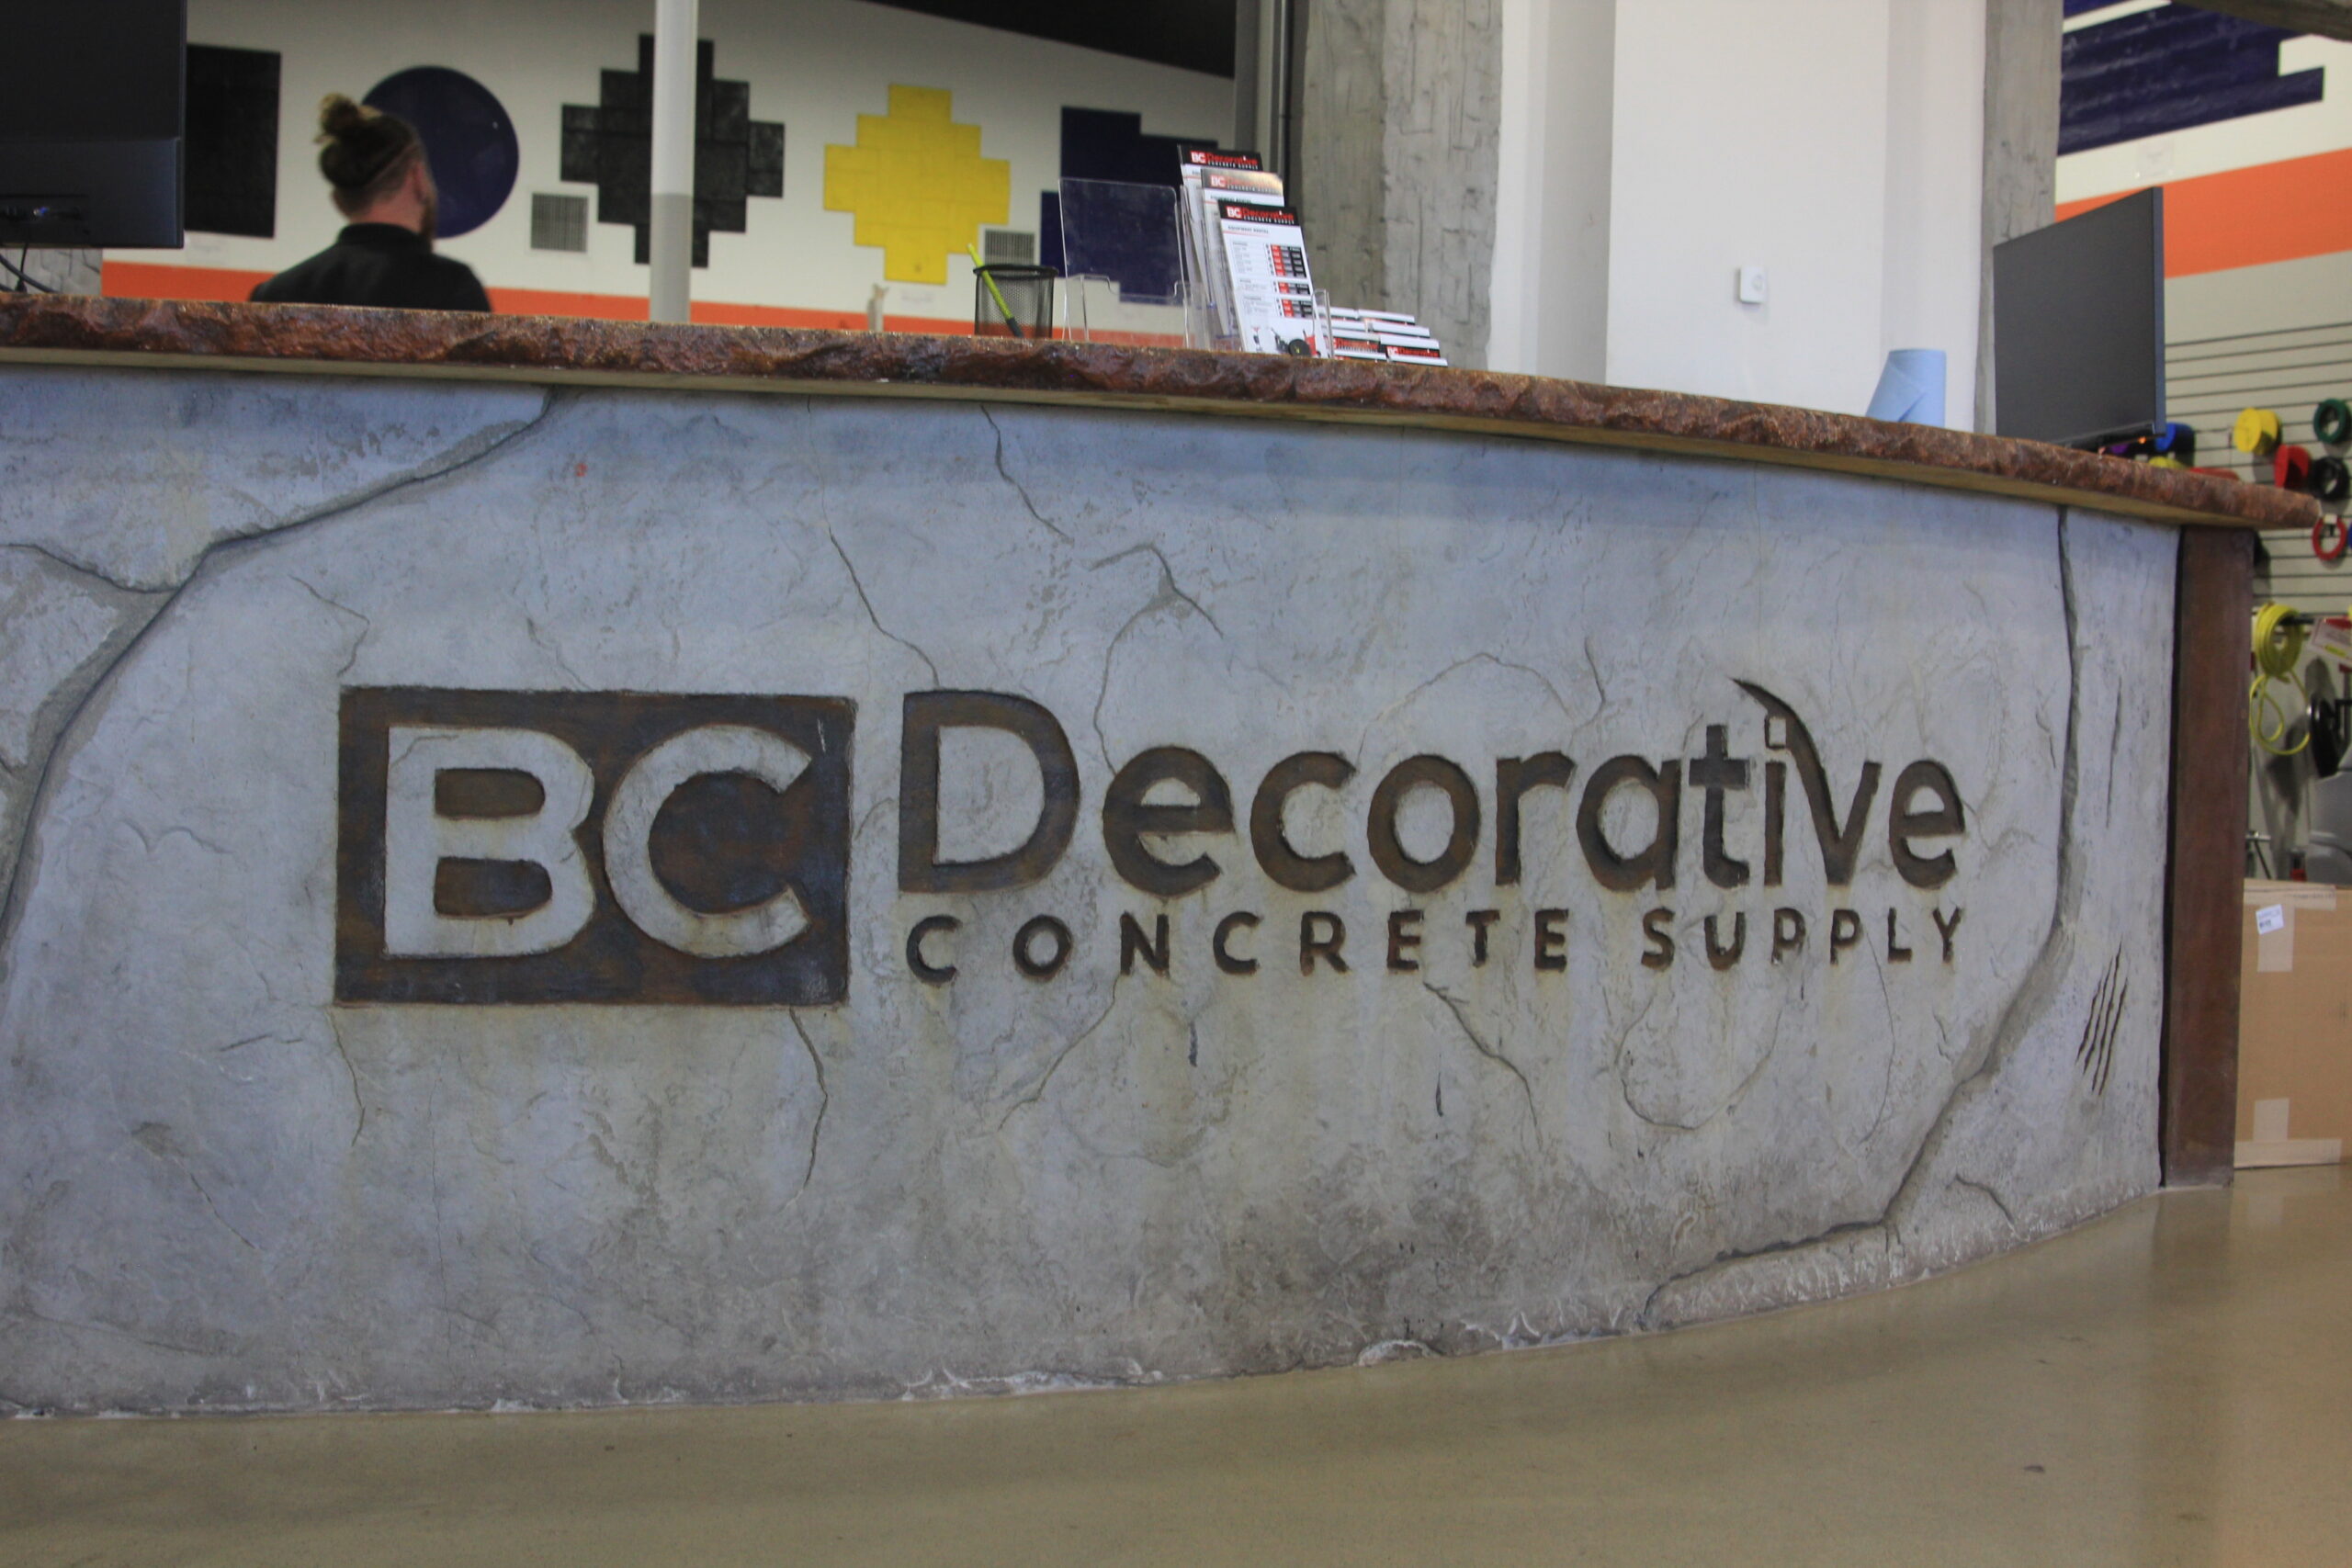 BC Decorative Concrete Supply is a leading source in Texas for decorative concrete materials, equipment sales, rentals and industry expert technical support.